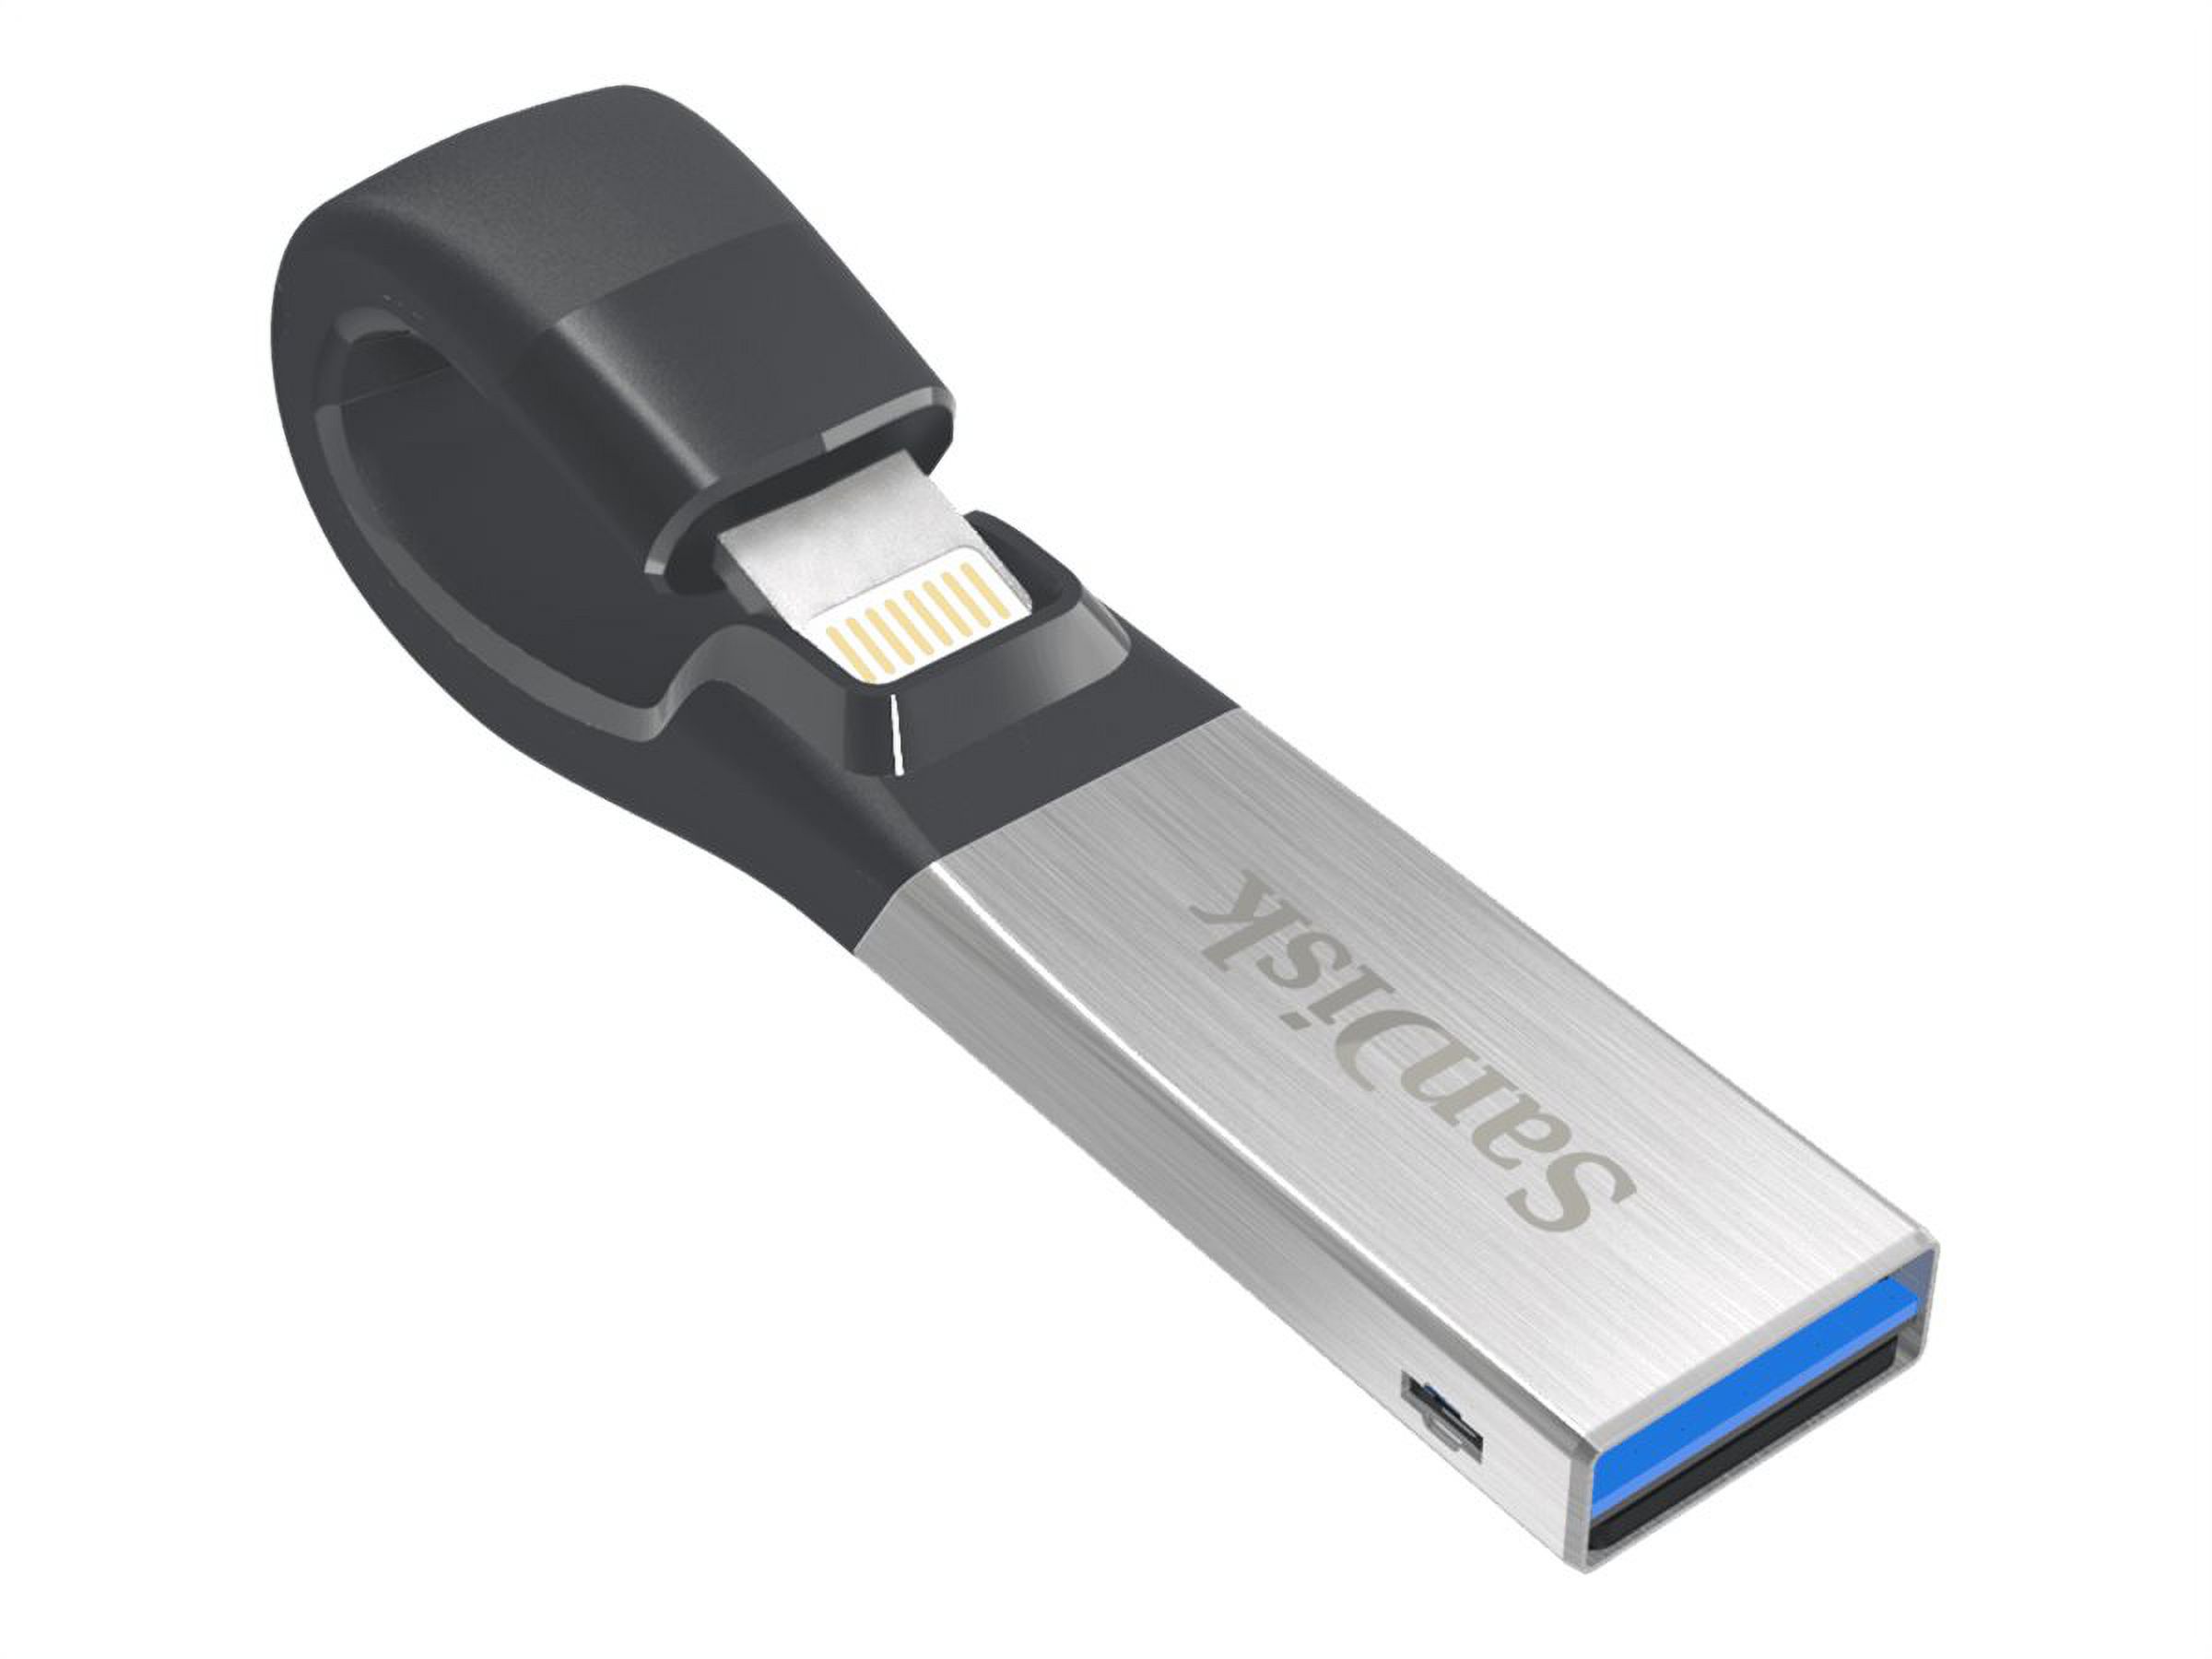 SanDisk SDIX30N-032G-GNAOA iXpand Flash Drive 32GB for iPhone6s/6s Module - image 3 of 5